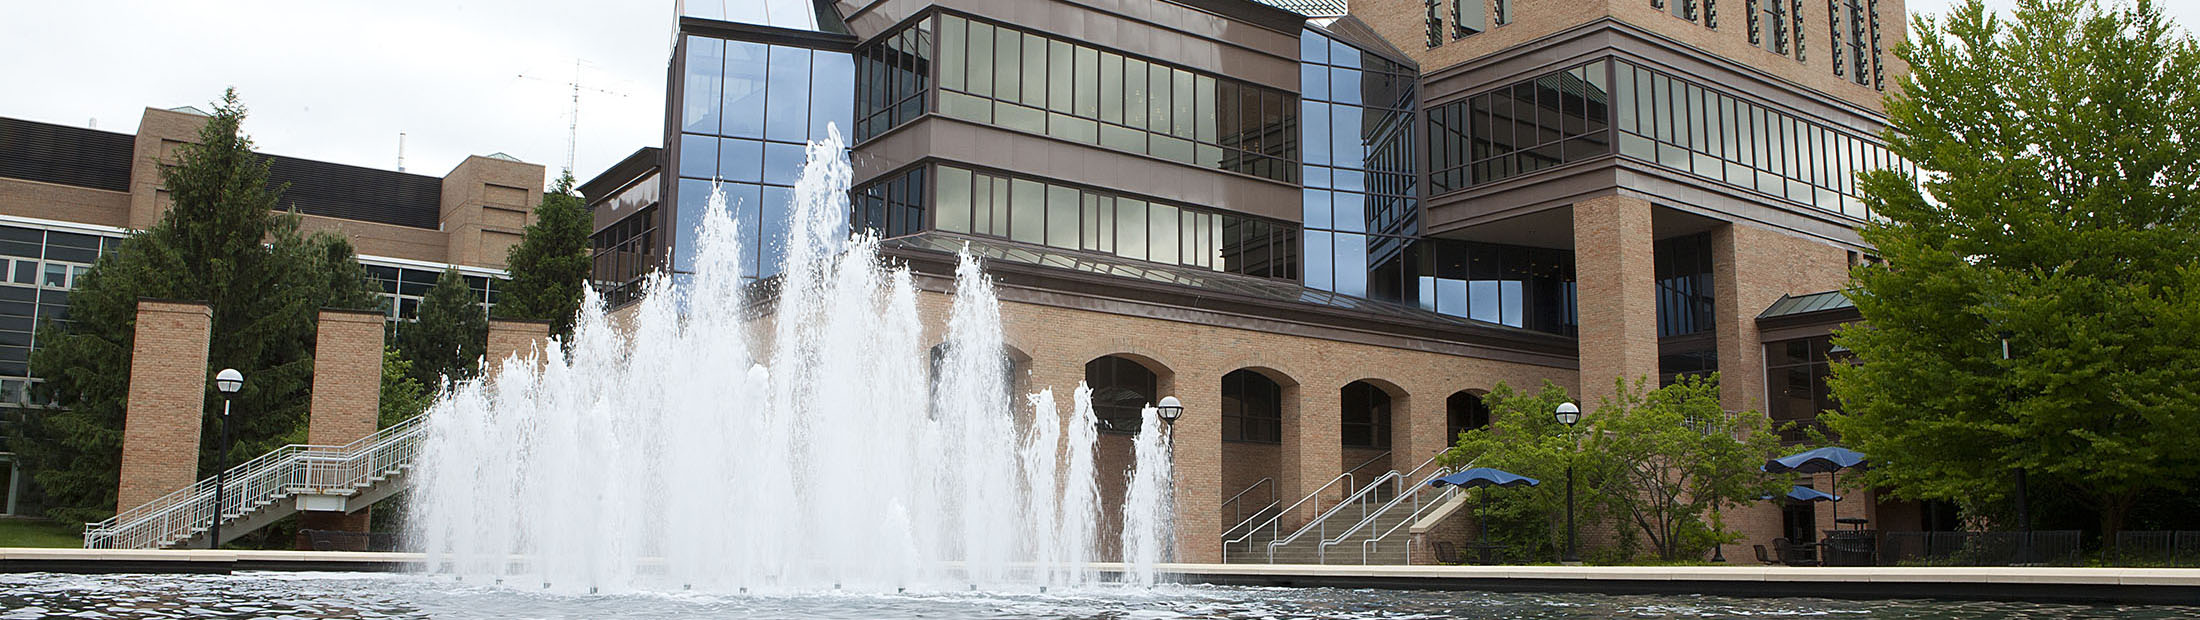 The Lurie building with the fountain running in the background